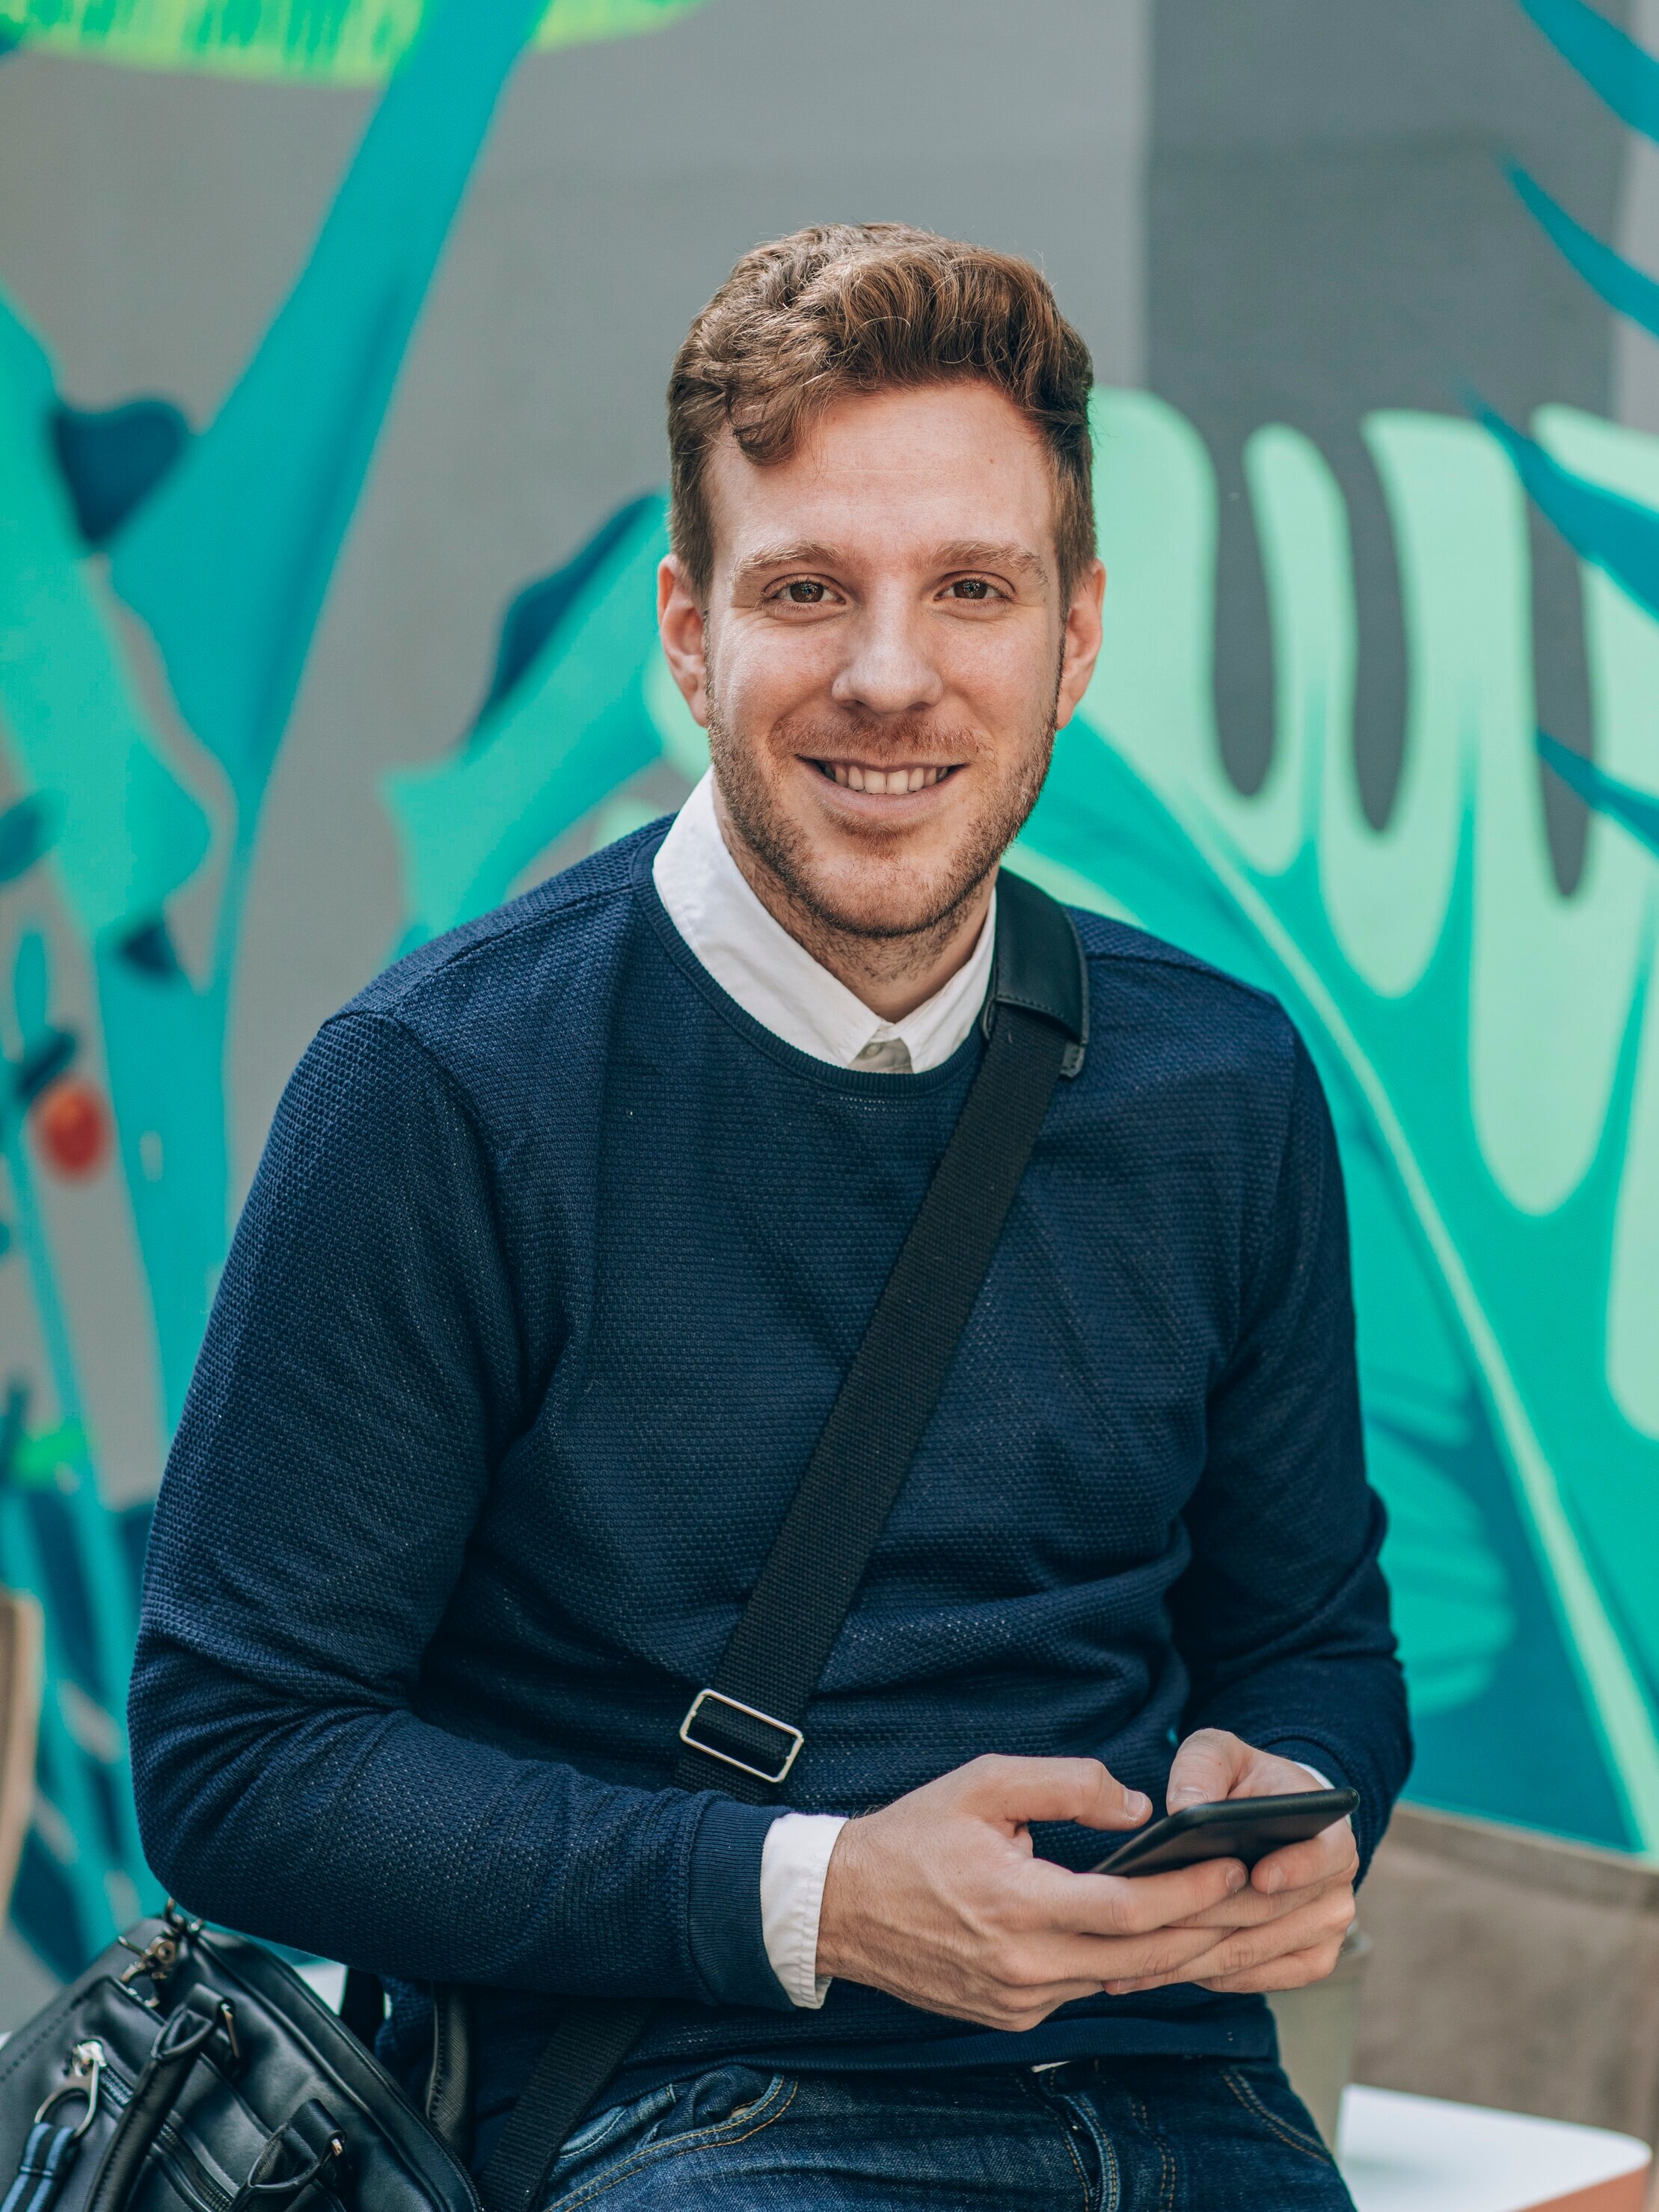 Portrait of handsome young smiling therapist holding smartphone and looking at camera.